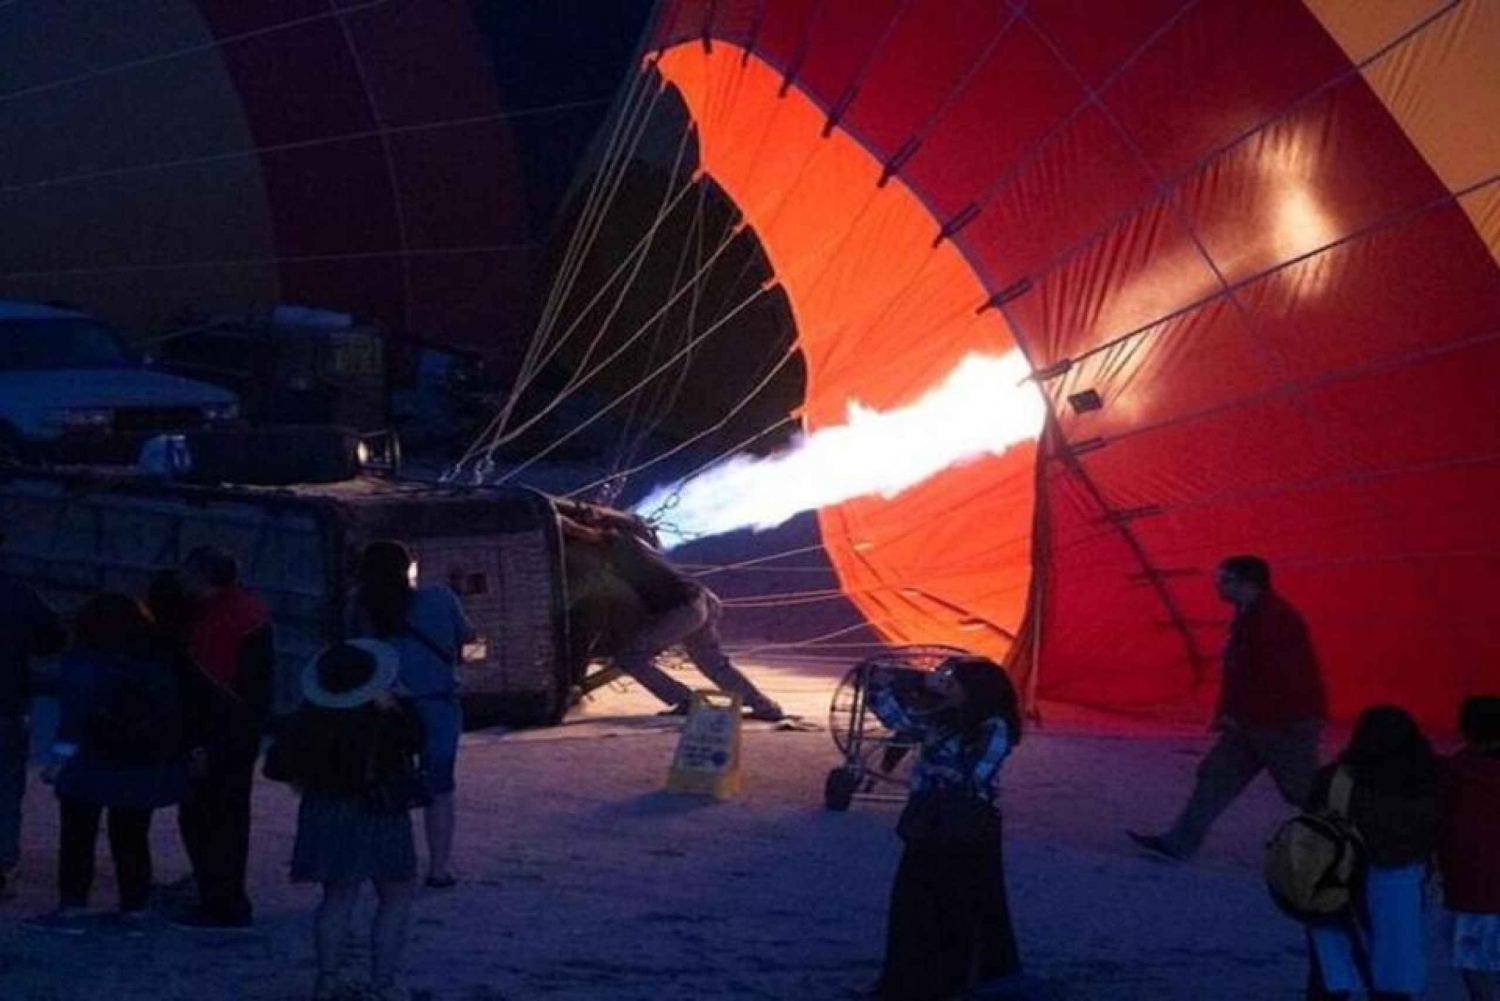 Luxor: 8-Day Egypt Package with Flights and Hot Air-Balloon